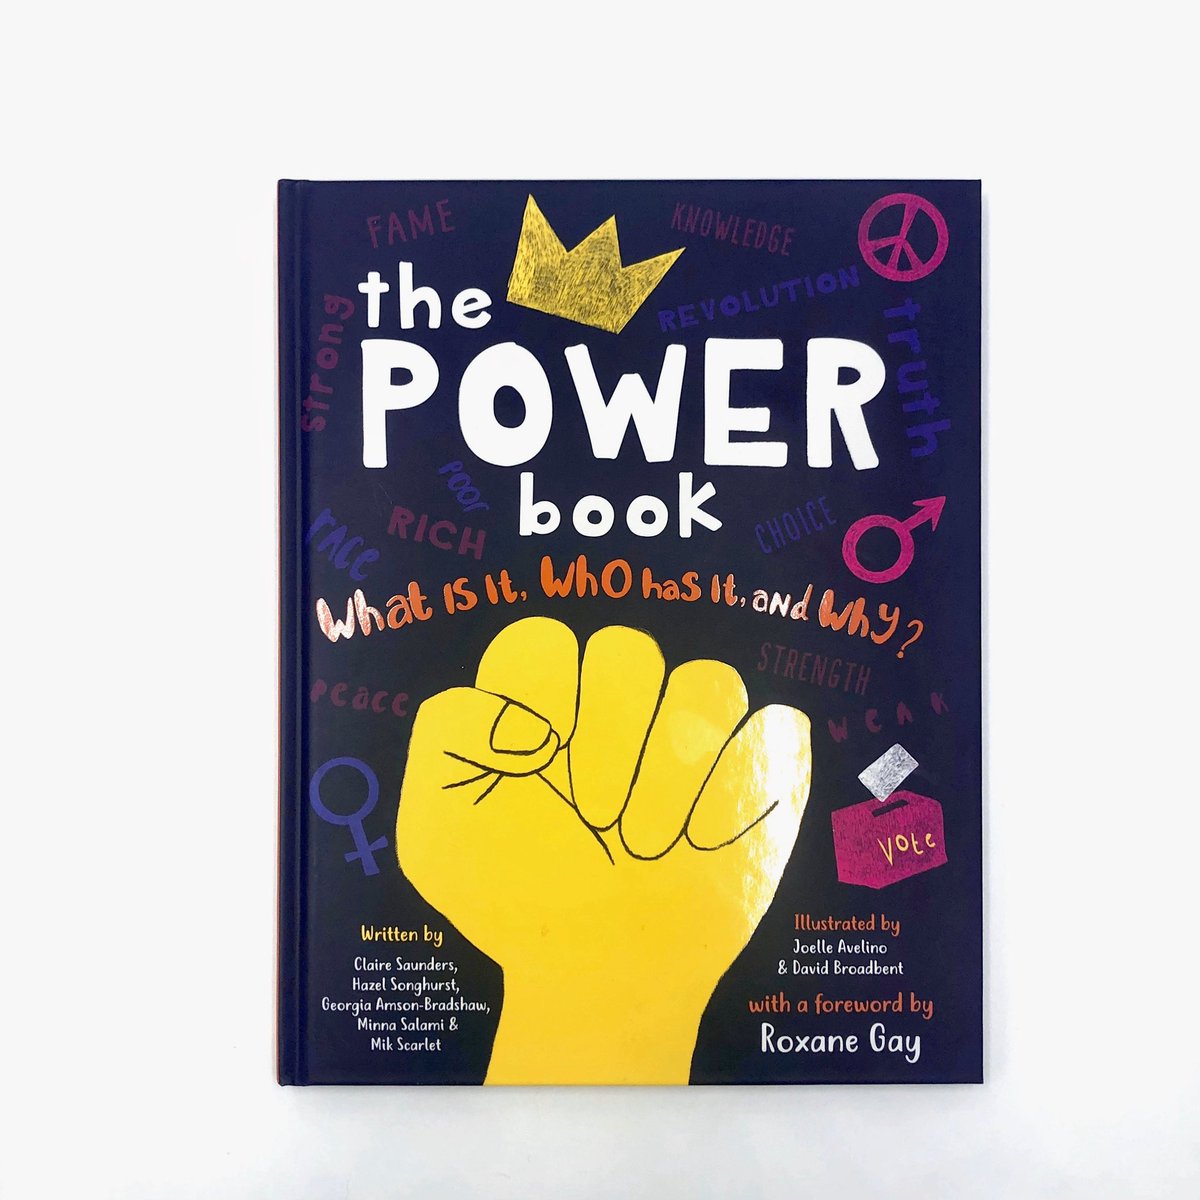 “It is important to understand what it means to have power and what it means to not have power.' —@rgay 

@MsAfropolitan @mikscarlet foreword by @rgay and illustrated by @joelle_avelino quartoknows.com/books/97817824…